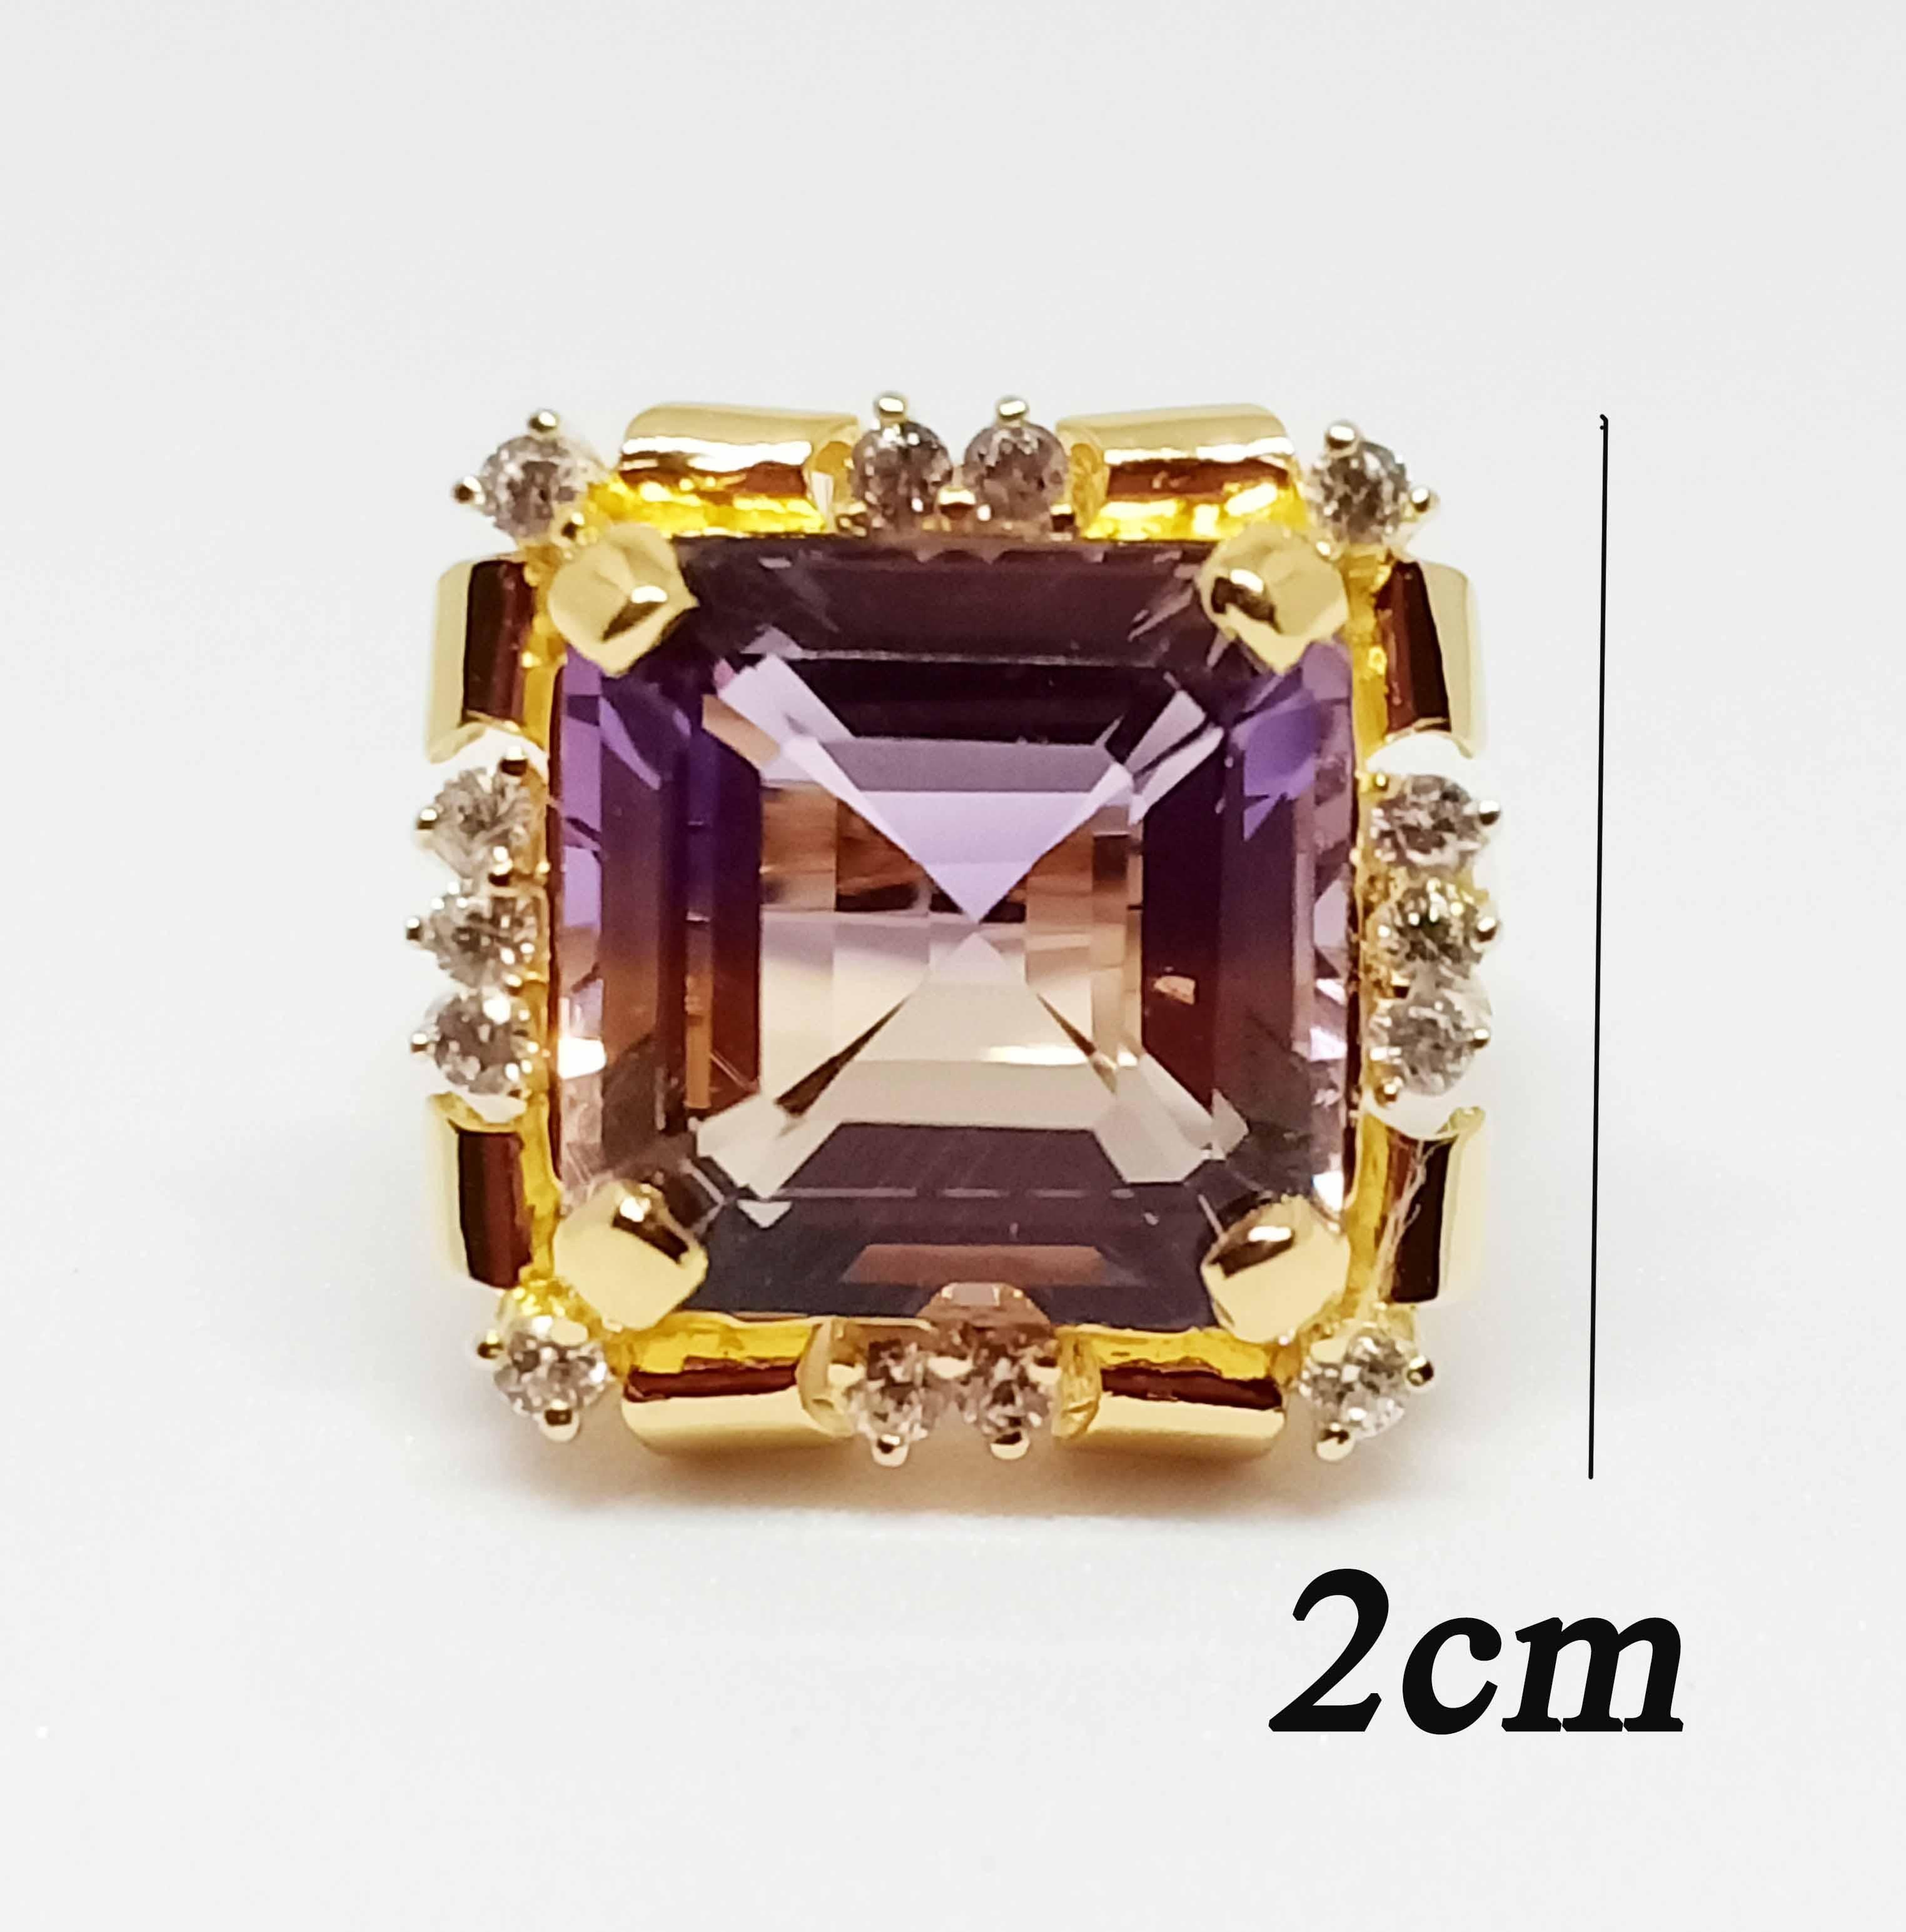 Ametrine Octagon 14.5x14.5mm ( 15.89 cts )
White zircon round. 2 mm. 14 pcs.
Sterling silver on 18K gold Plated
Size 7 us.
(Can be resizable in lower size not upper size )

Search (seller storefront) ornamento jewellery

Ametrine history and